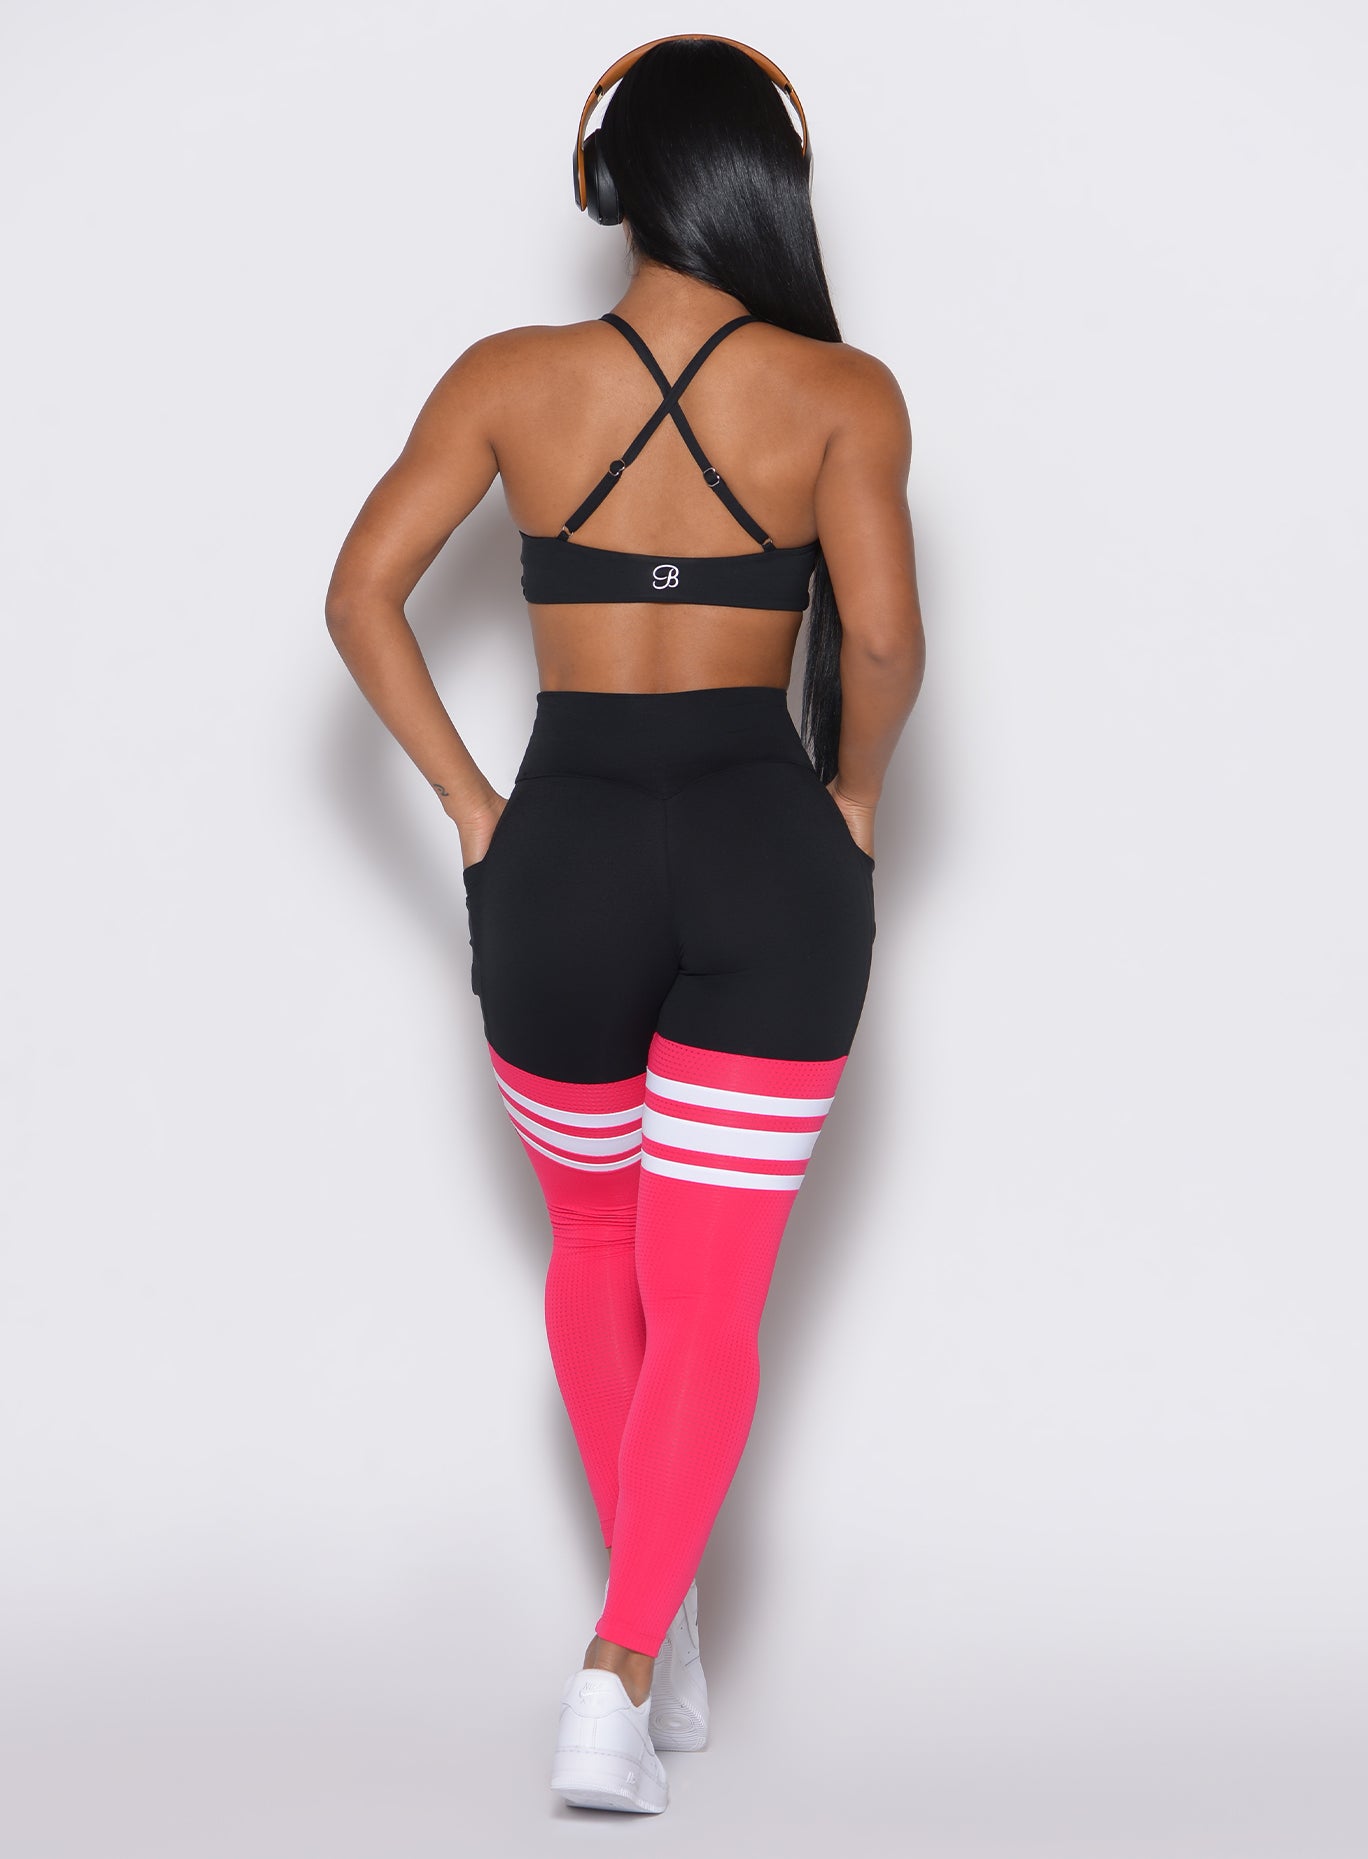 Back profile view of a model wearing the Perform Thigh Highs in Black Sky color  along with a black sports bra